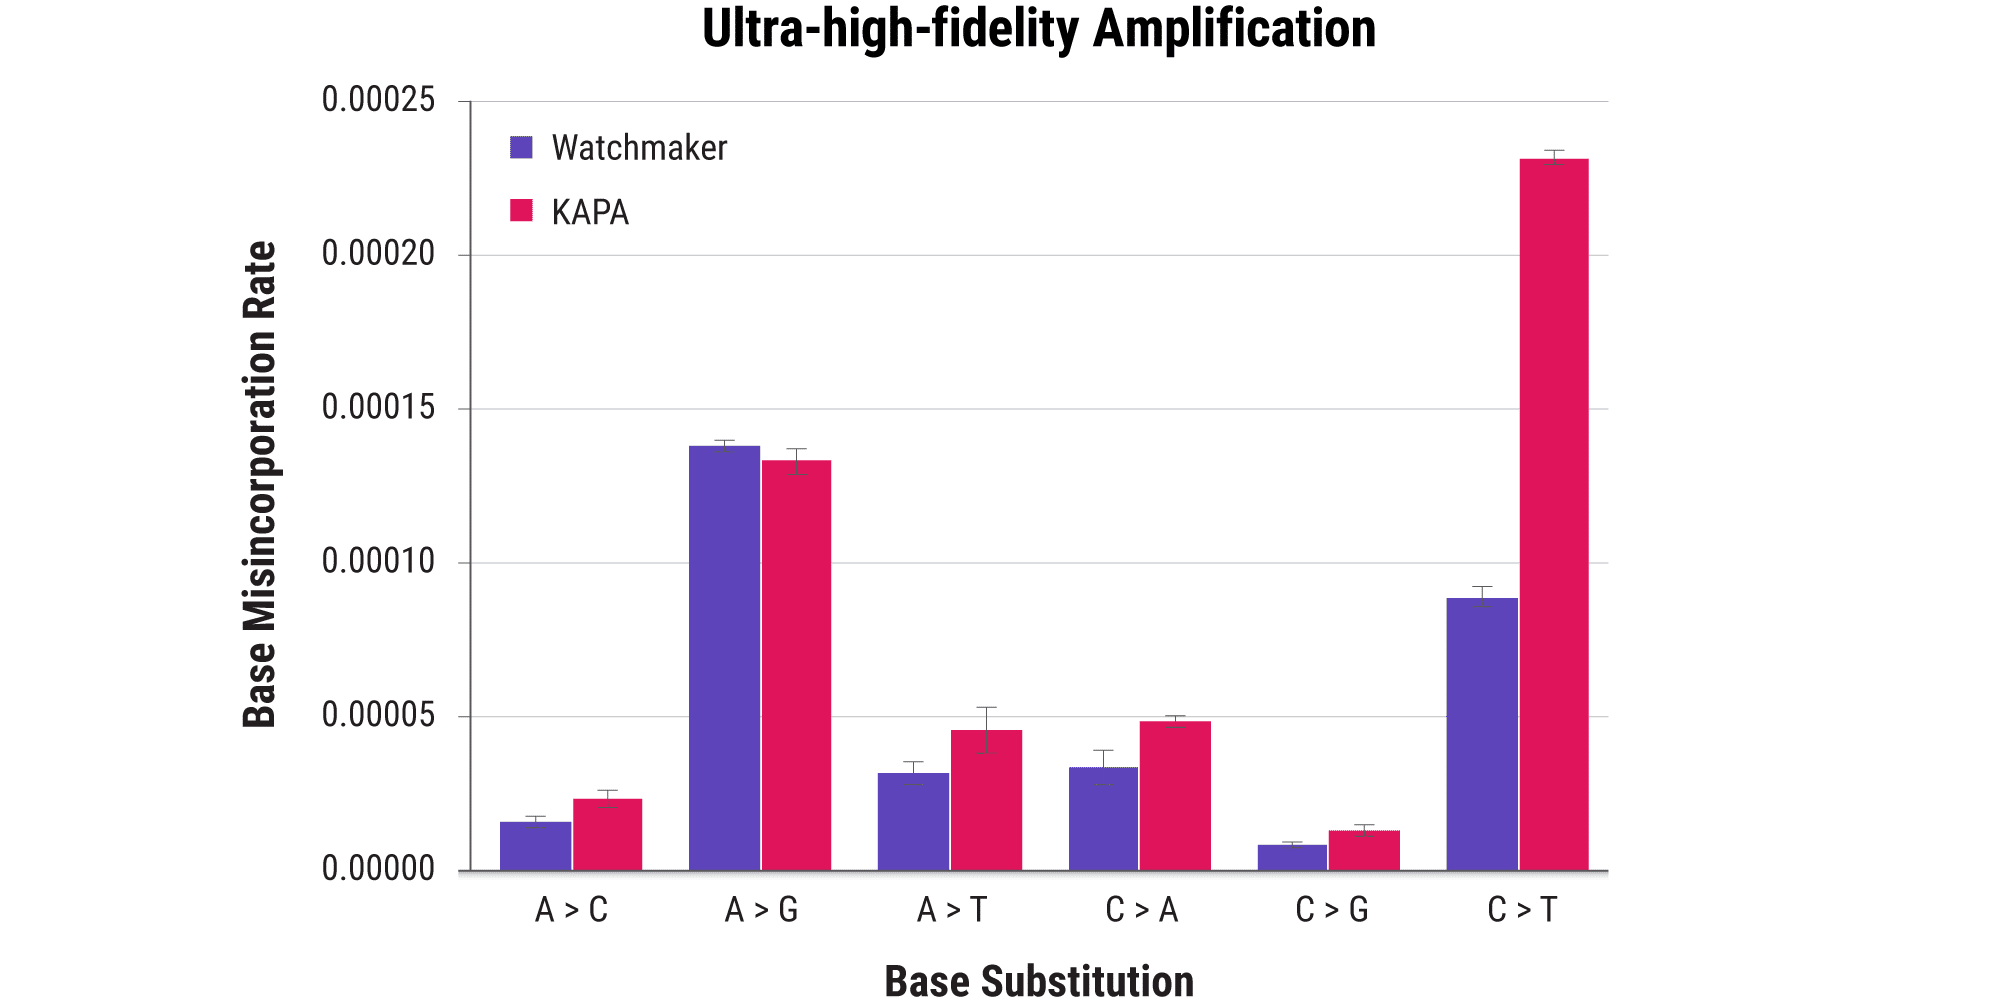 Figure 4B. High-efficiency, high-fidelity amplification. Error rates of the Equinox Amplification Master Mix and KAPA HiFi HotStart ReadyMix were measured after > 9 million bases incorporation events in three separate reactions, using a proprietary NGS-based assay. Base substitution profiles were examined in triplicate over 5.4 million G/C and 4.0 million A/T incorporation events. Equinox displayed an overall polymerase error rate 40% lower than KAPA HiFi.